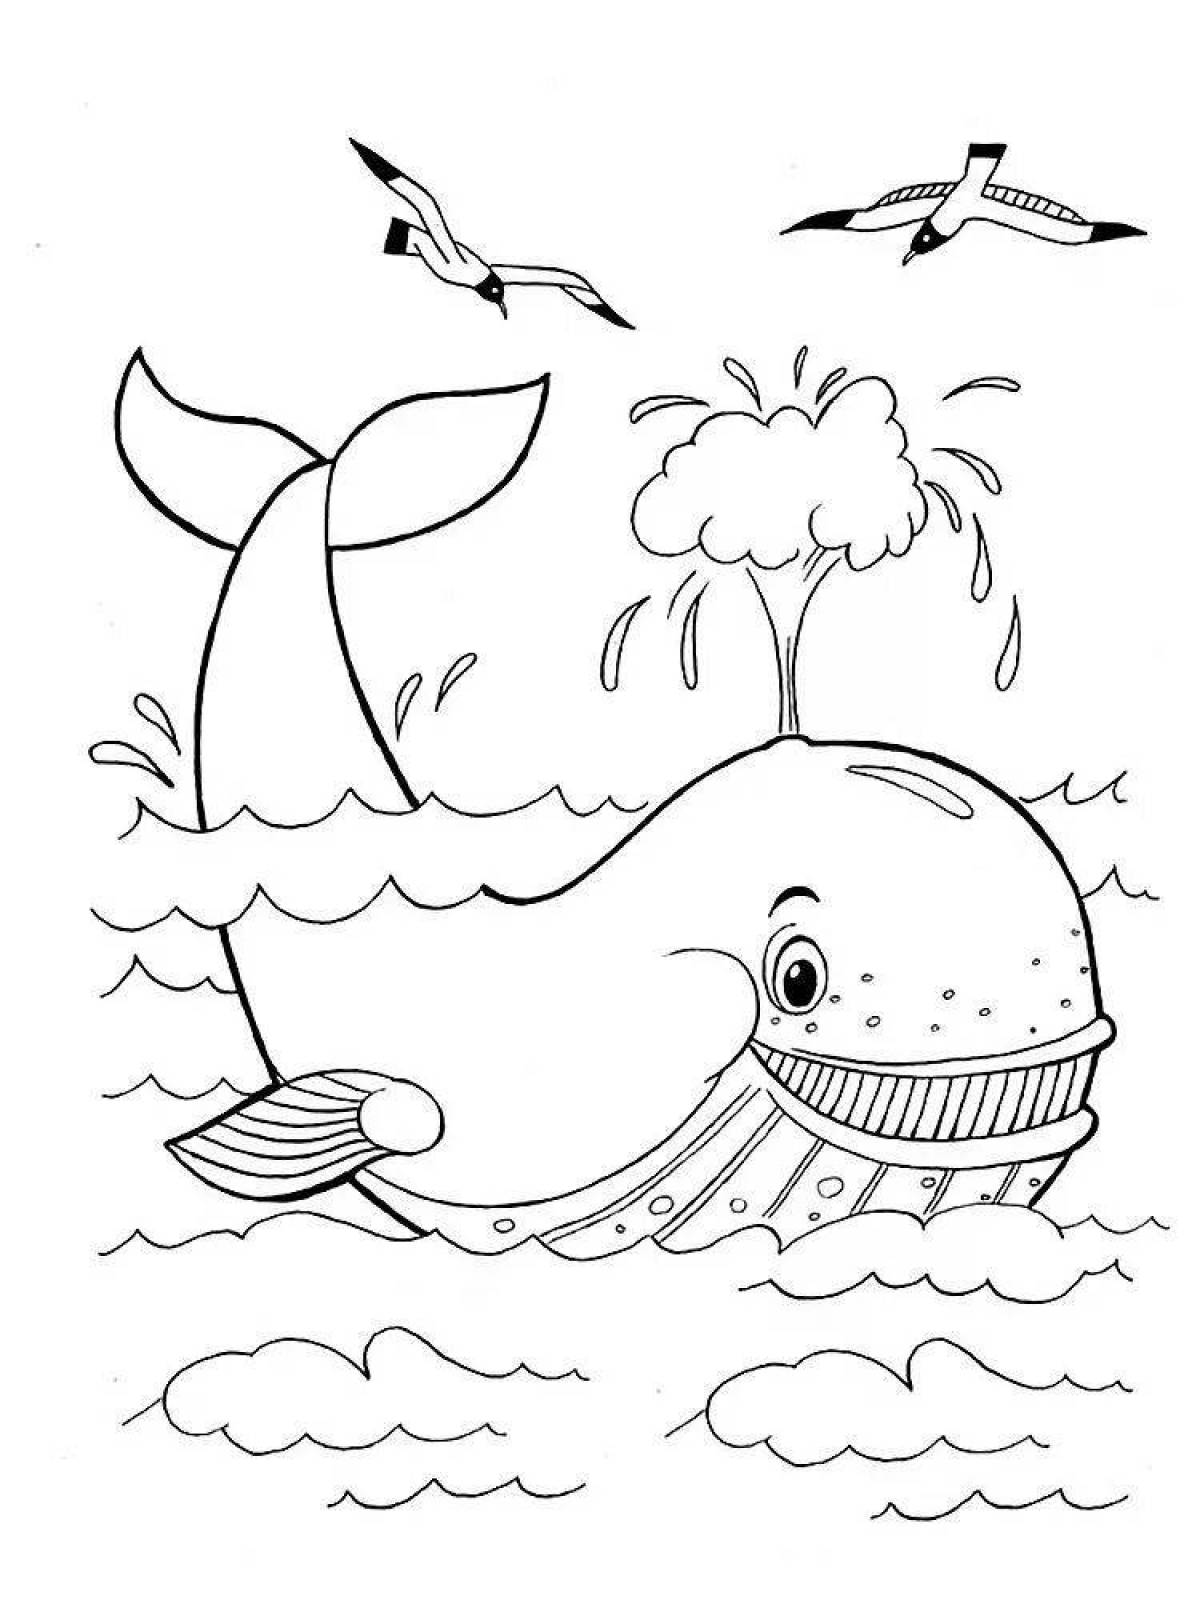 Great whale coloring book for kids